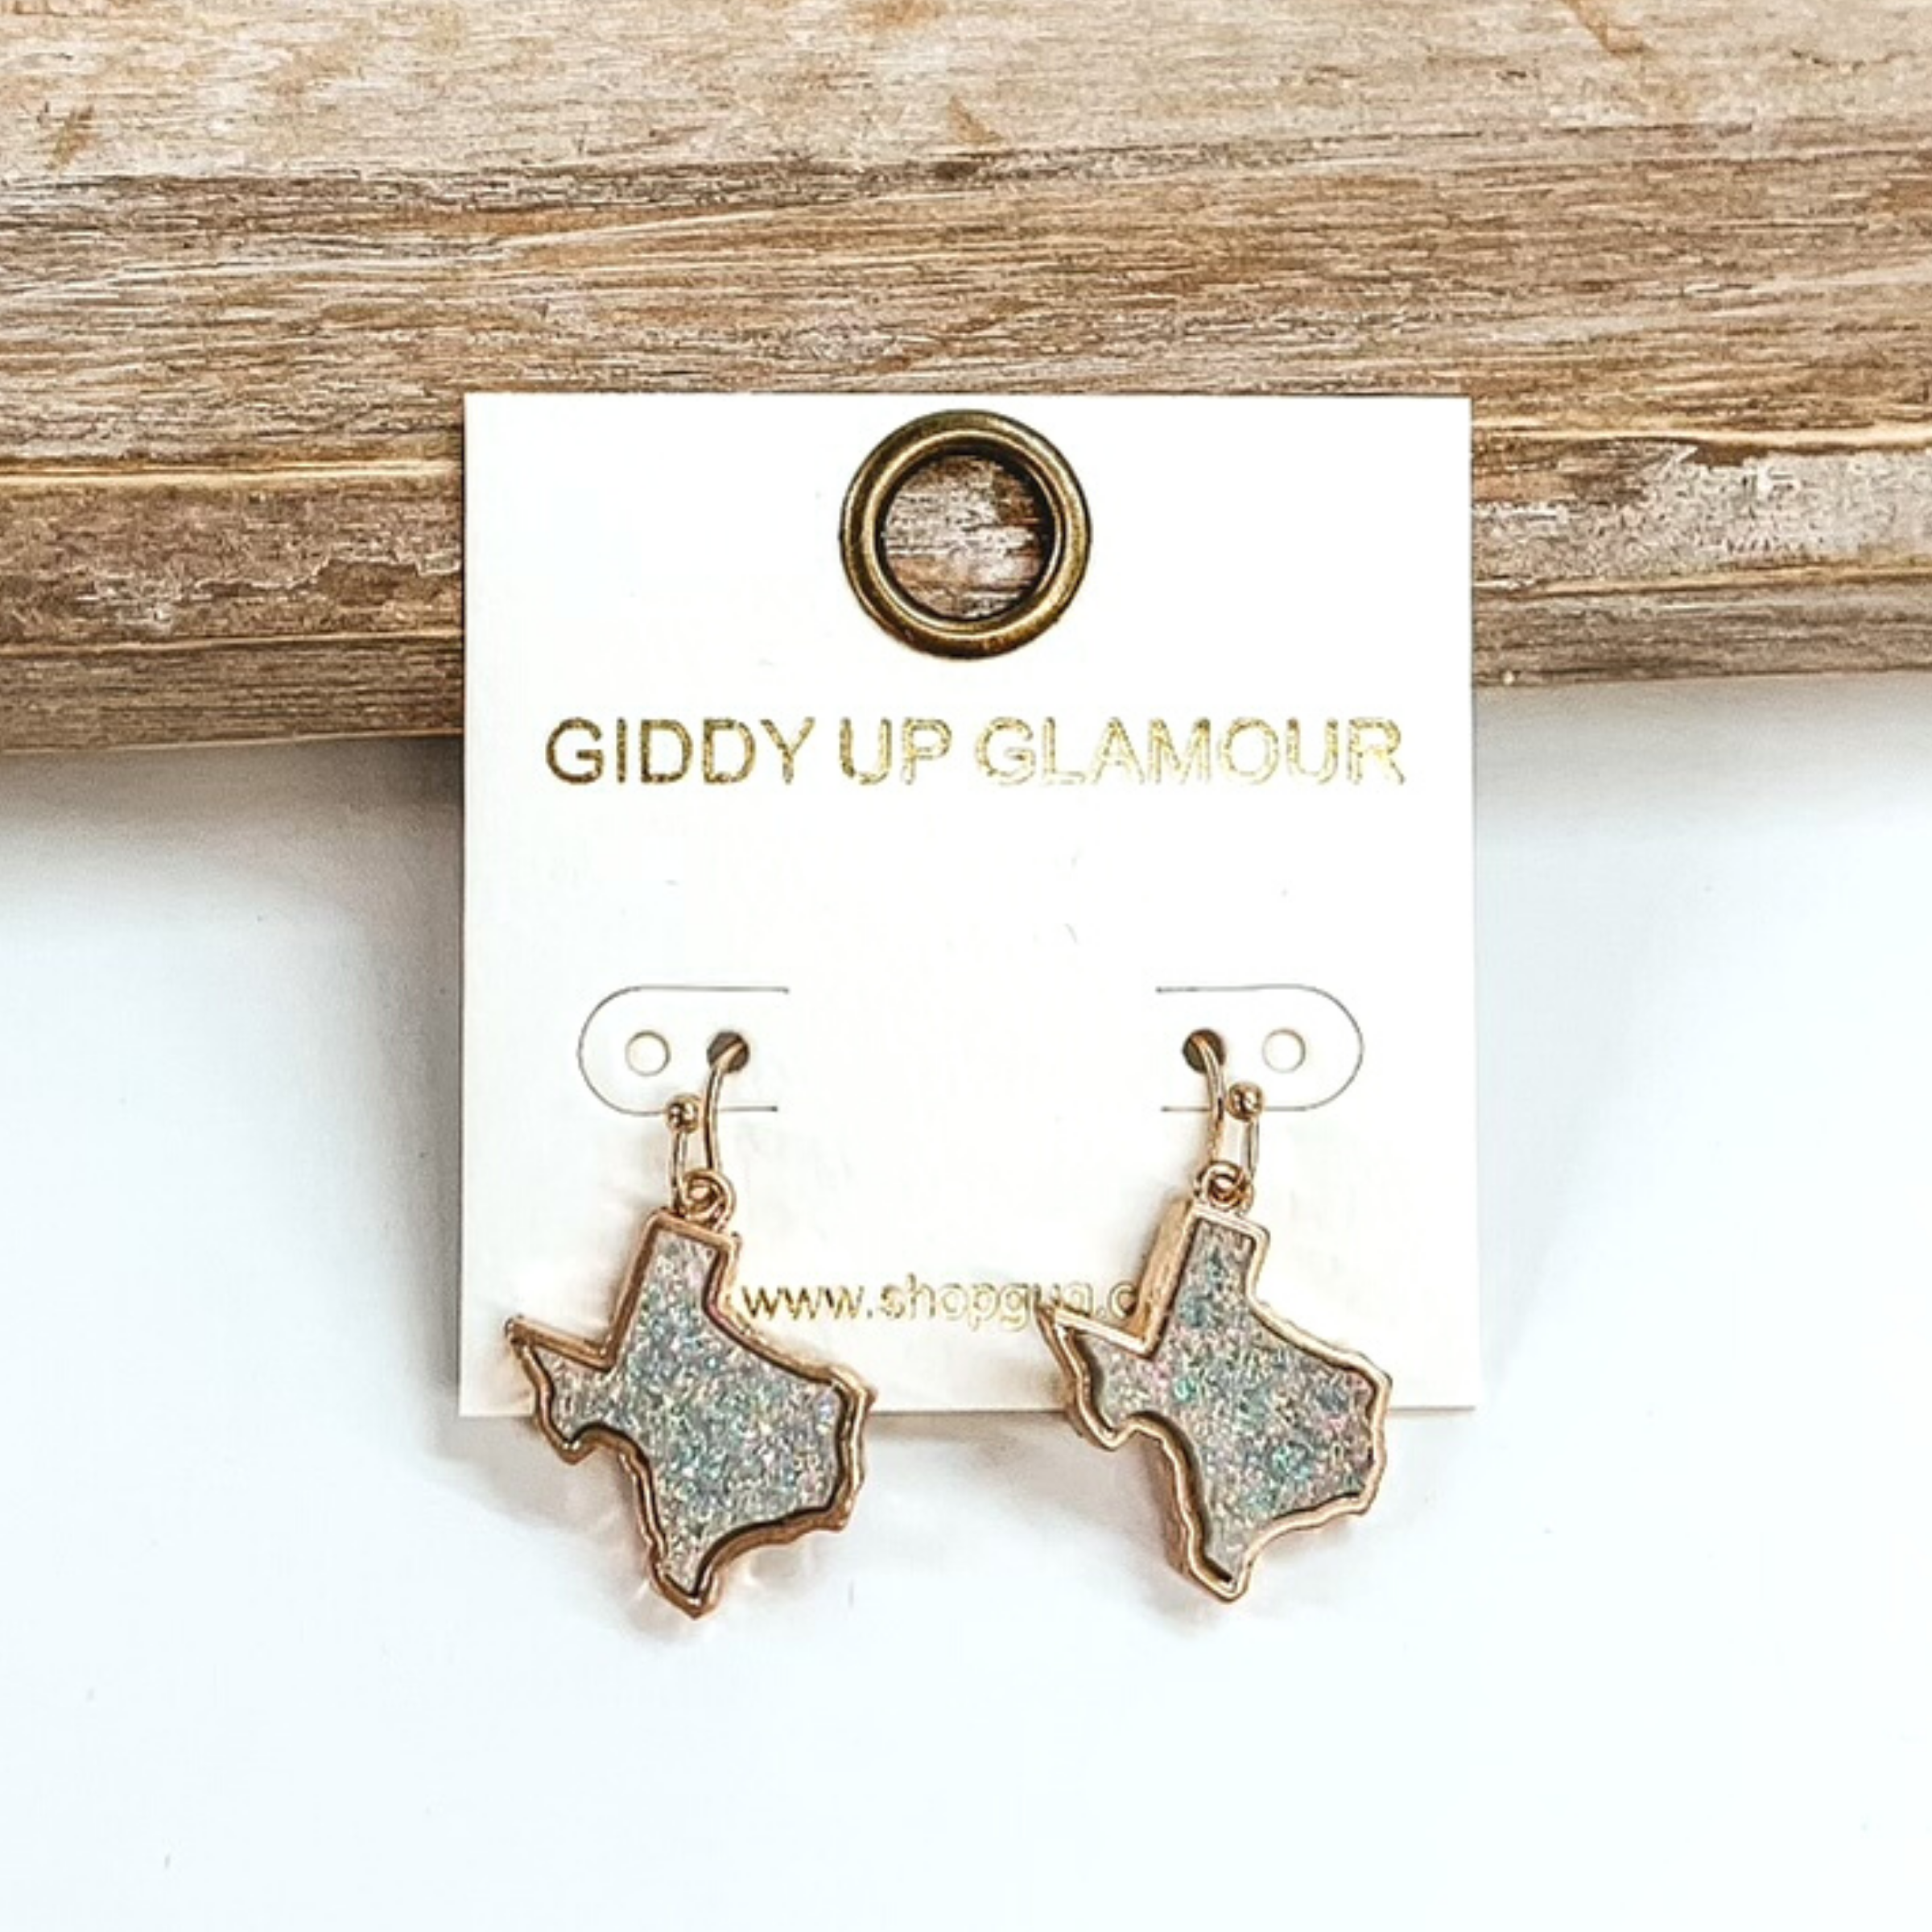 Gold dangle earrings with druzy, grey iridescent, texas shaped stone. These earrings are pictured on a white earrings holder on a white background, leaning against a tan block.